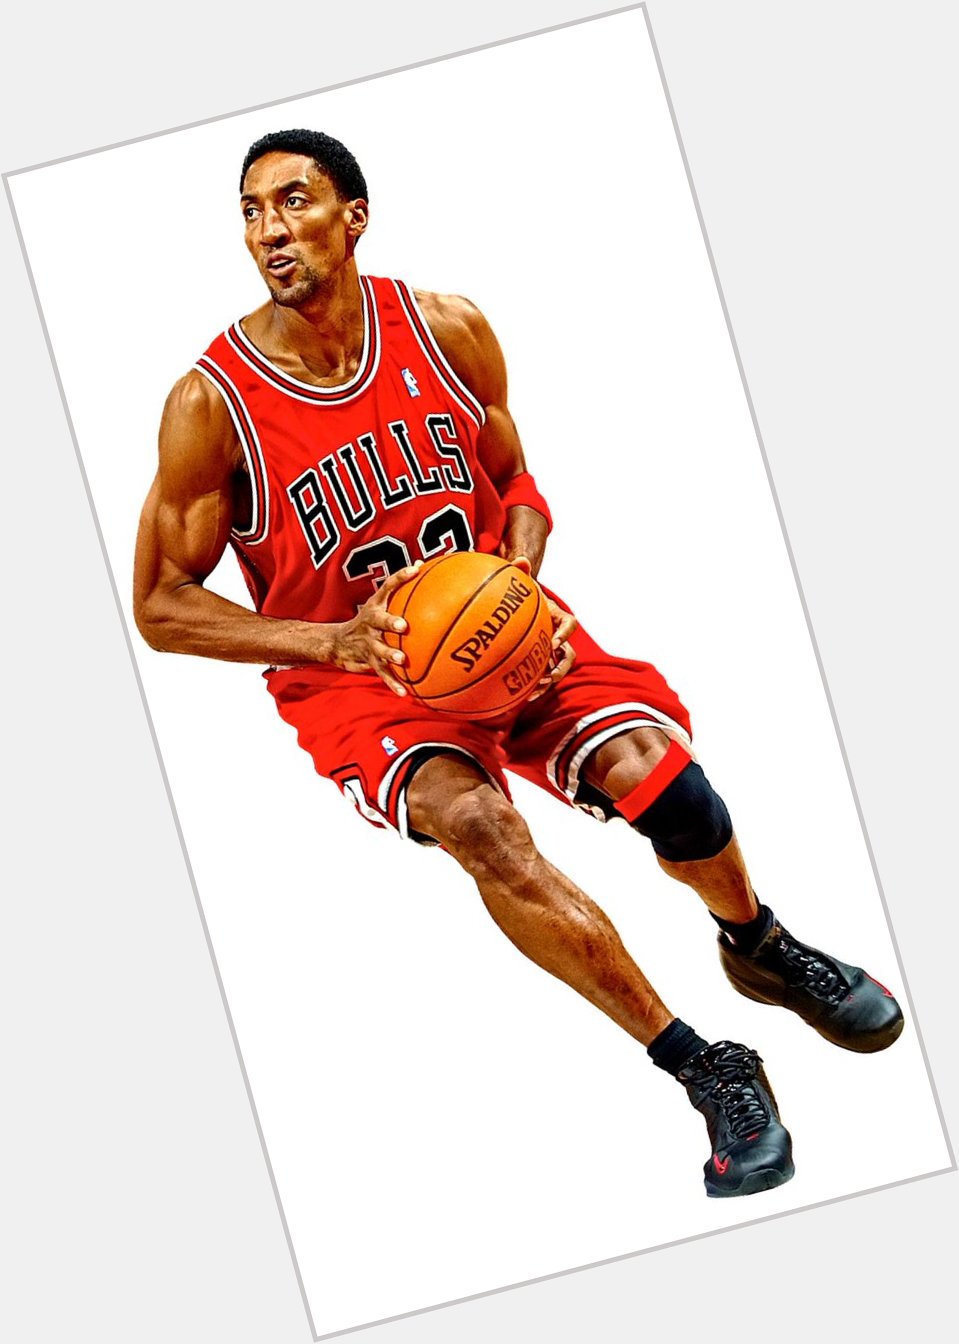 HAPPY BIRTHDAY to one of my all time favorite basketball players Scottie Pippen 